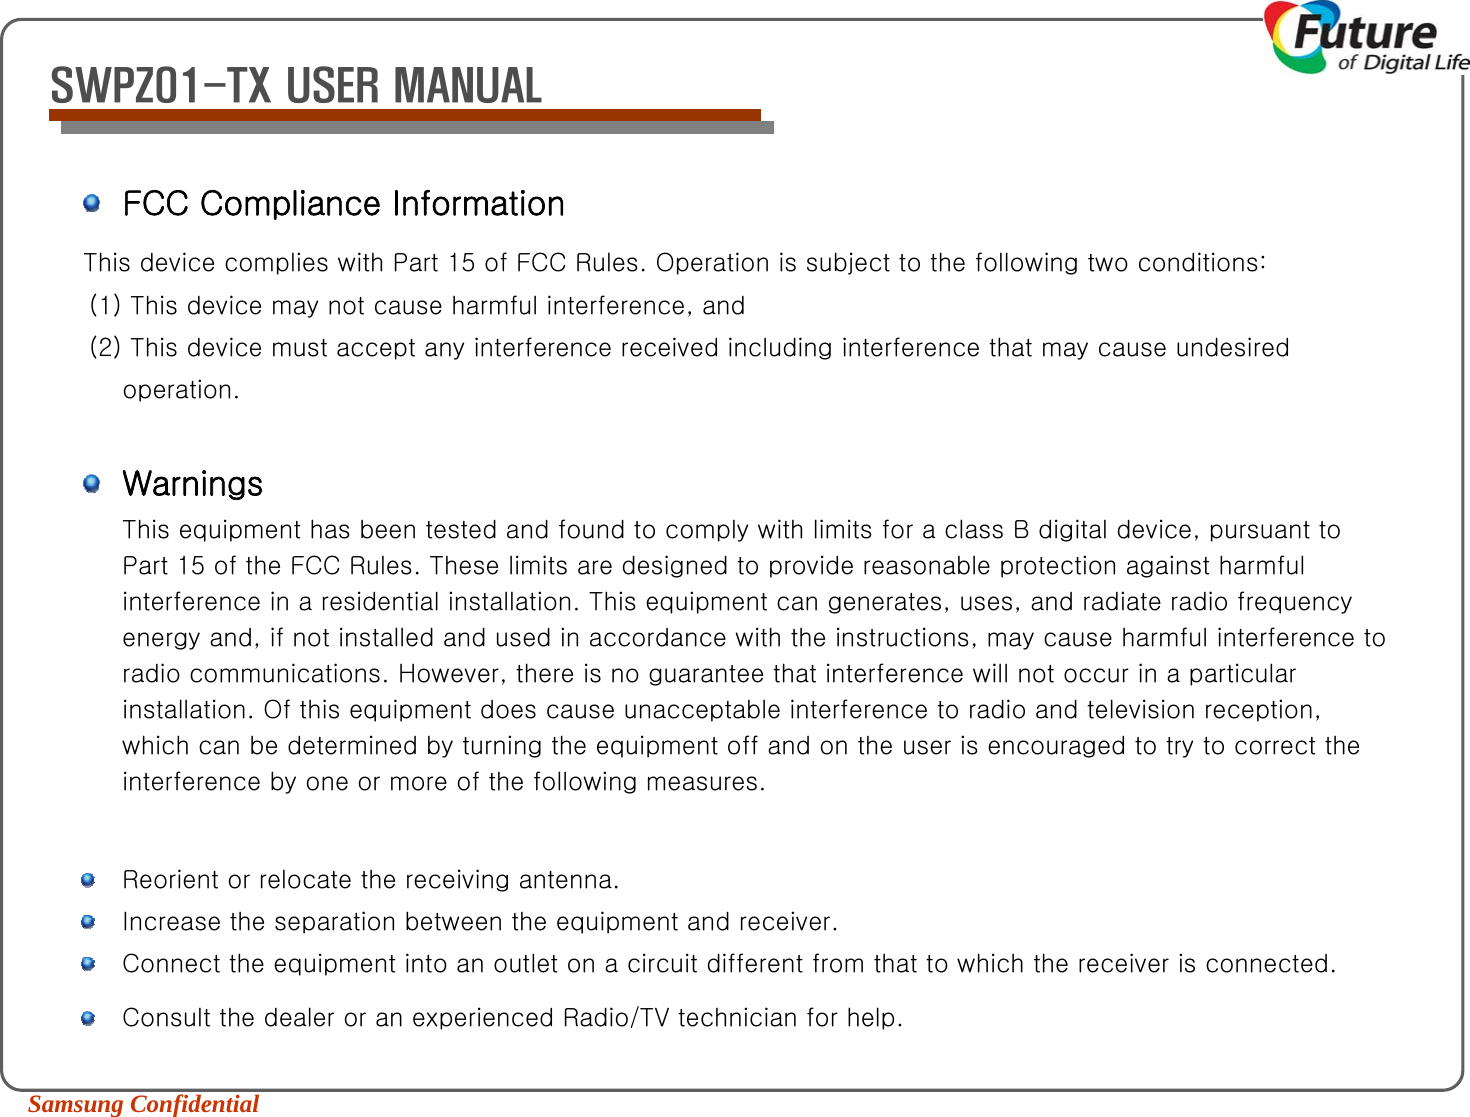 Samsung Confidential SWPZ01-TX USER MANUALFCC Compliance InformationThis device complies with Part 15 of FCC Rules. Operation is subject to the following two conditions: (1) This device may not cause harmful interference, and (2) This device must accept any interference received including interference that may cause undesired operation. WarningsThis equipment has been tested and found to comply with limits for a class B digital device, pursuant to Part 15 of the FCC Rules. These limits are designed to provide reasonable protection against harmful interference in a residential installation. This equipment can generates, uses, and radiate radio frequency energy and, if not installed and used in accordance with the instructions, may cause harmful interference to radio communications. However, there is no guarantee that interference will not occur in a particular installation. Of this equipment does cause unacceptable interference to radio and television reception, which can be determined by turning the equipment off and on the user is encouraged to try to correct the interference by one or more of the following measures. Reorient or relocate the receiving antenna.  Increase the separation between the equipment and receiver.  Connect the equipment into an outlet on a circuit different from that to which the receiver is connected.Consult the dealer or an experienced Radio/TV technician for help.